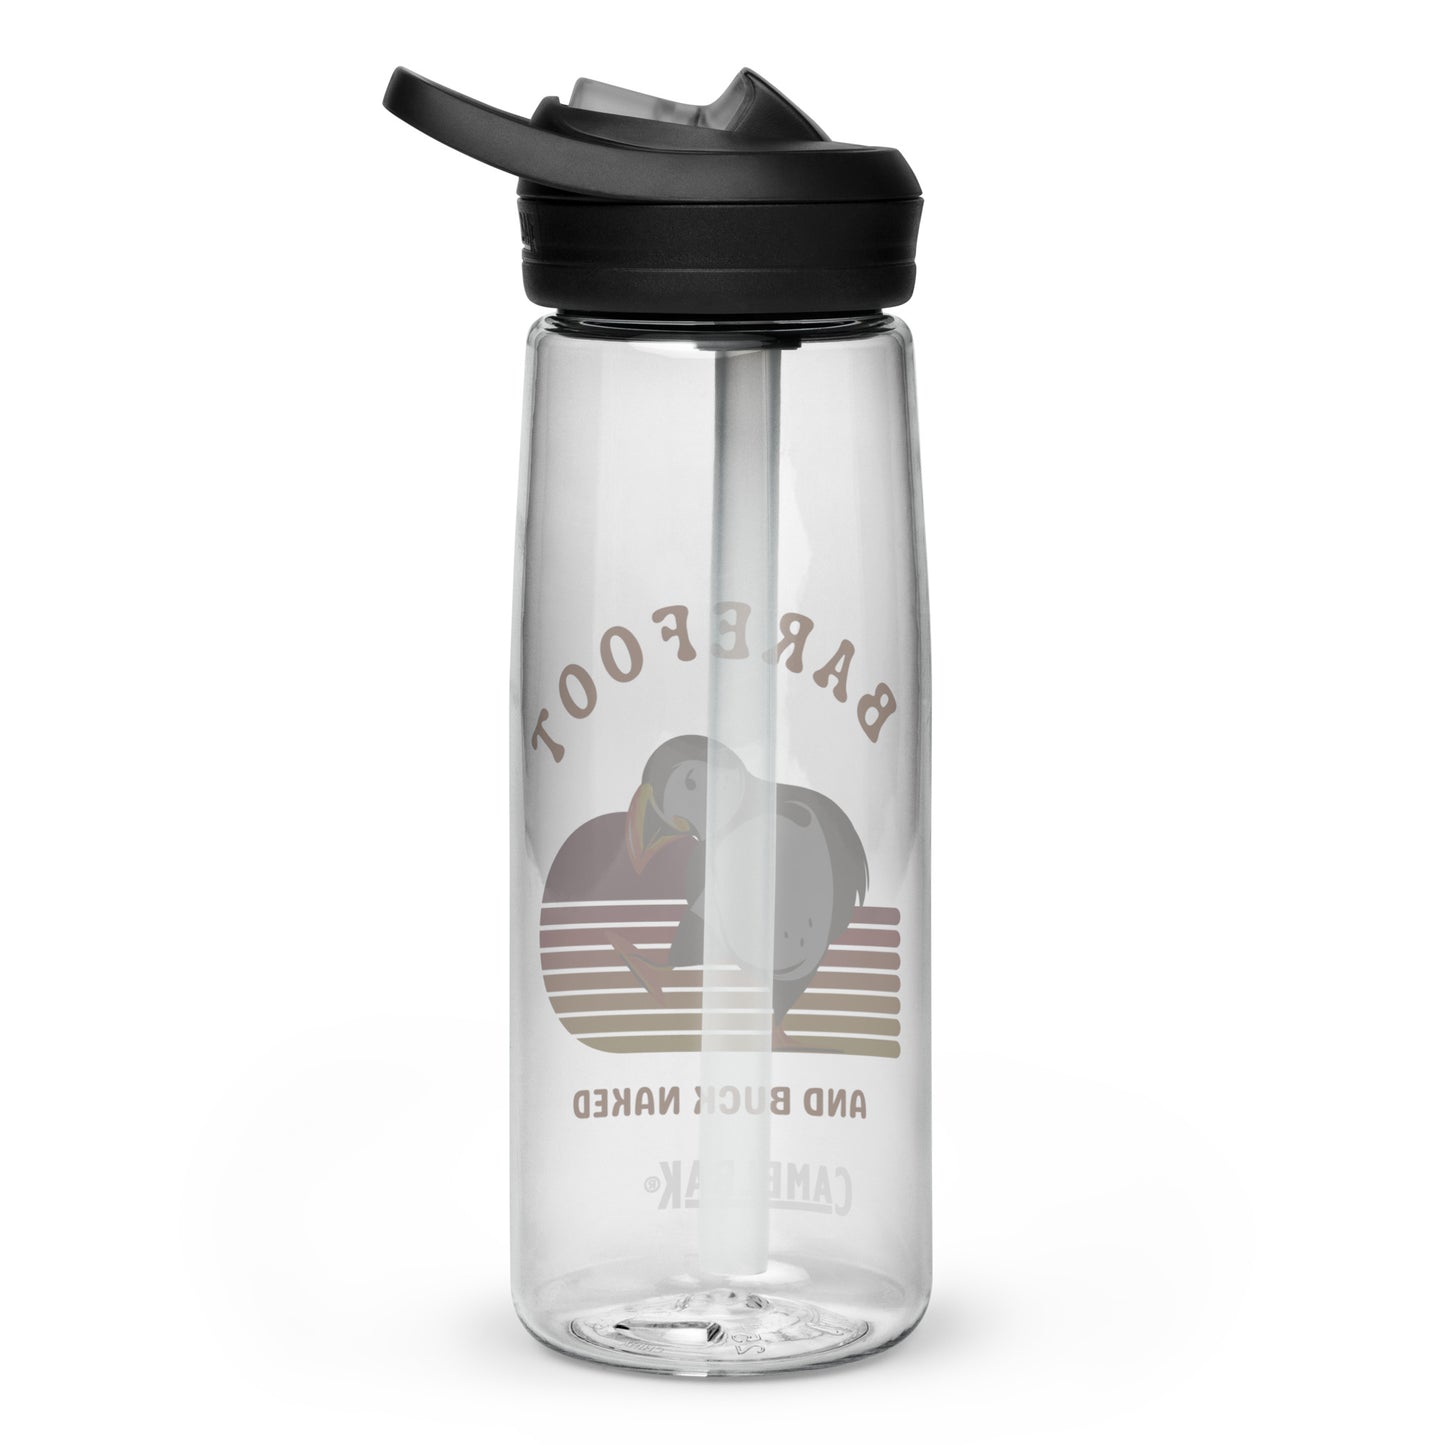 Barefoot and Buck Naked Sports water bottle